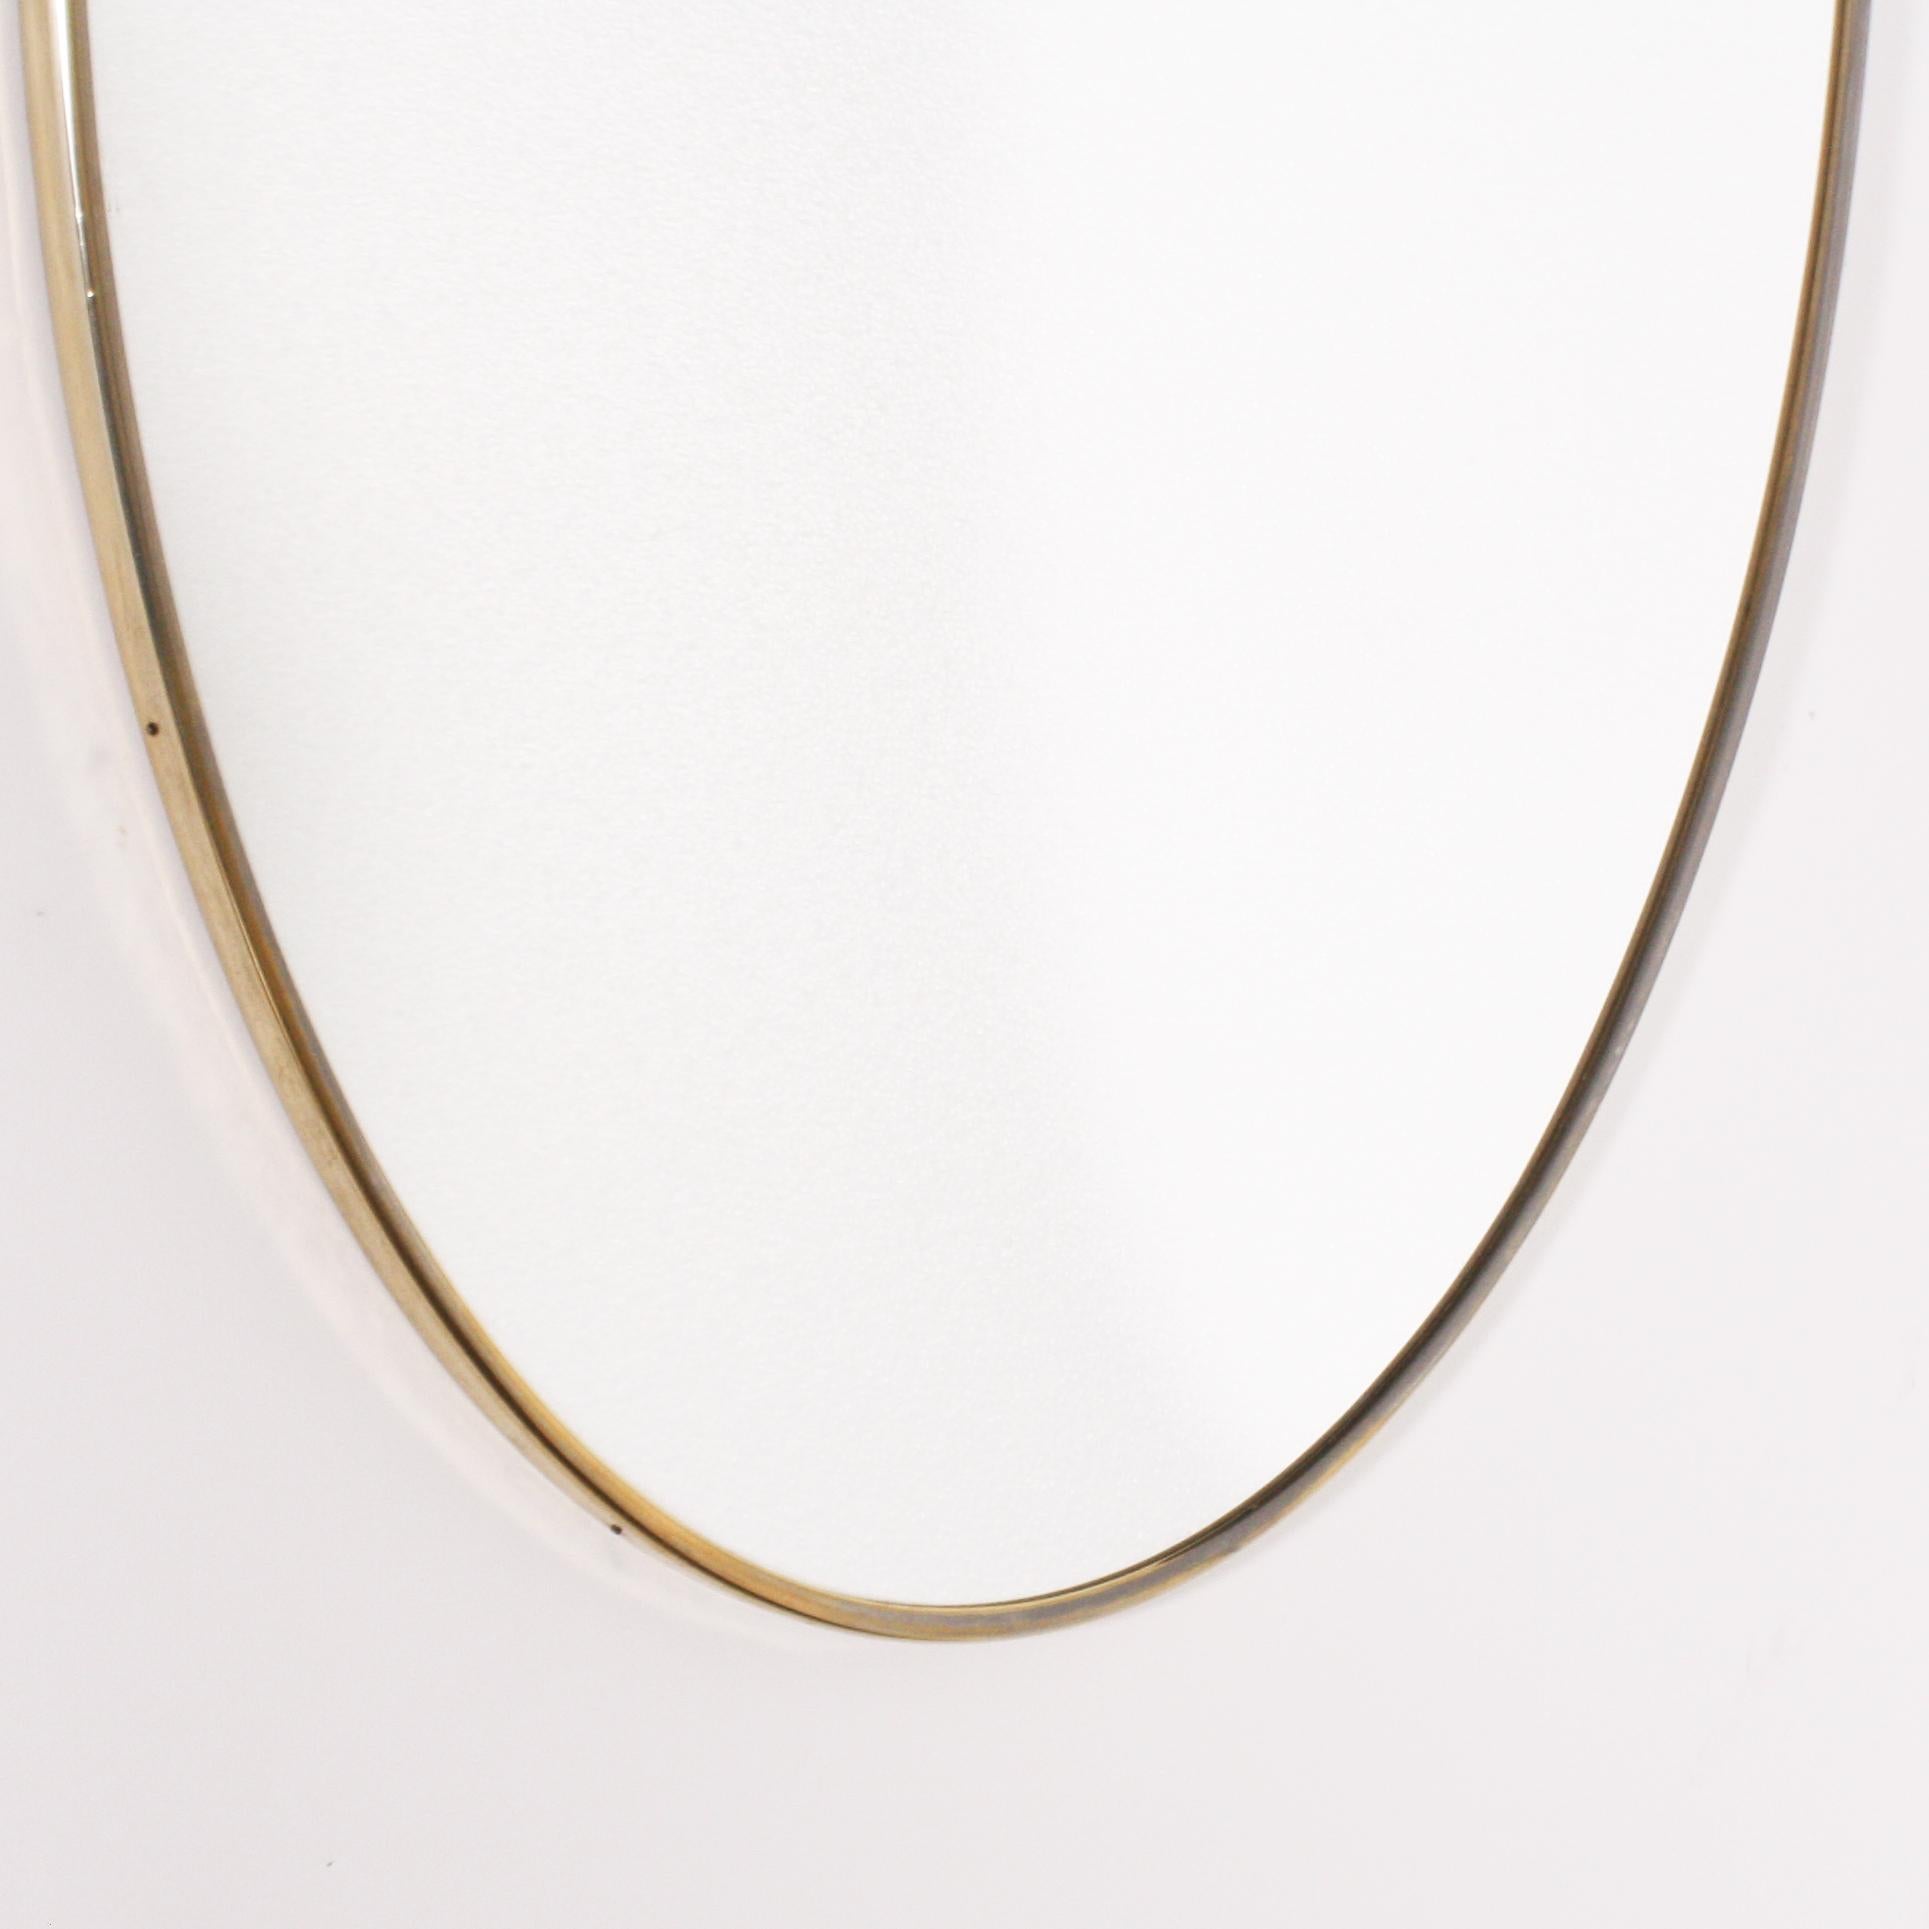 French Italian Oval Mirror with Brass Frame, circa 1950